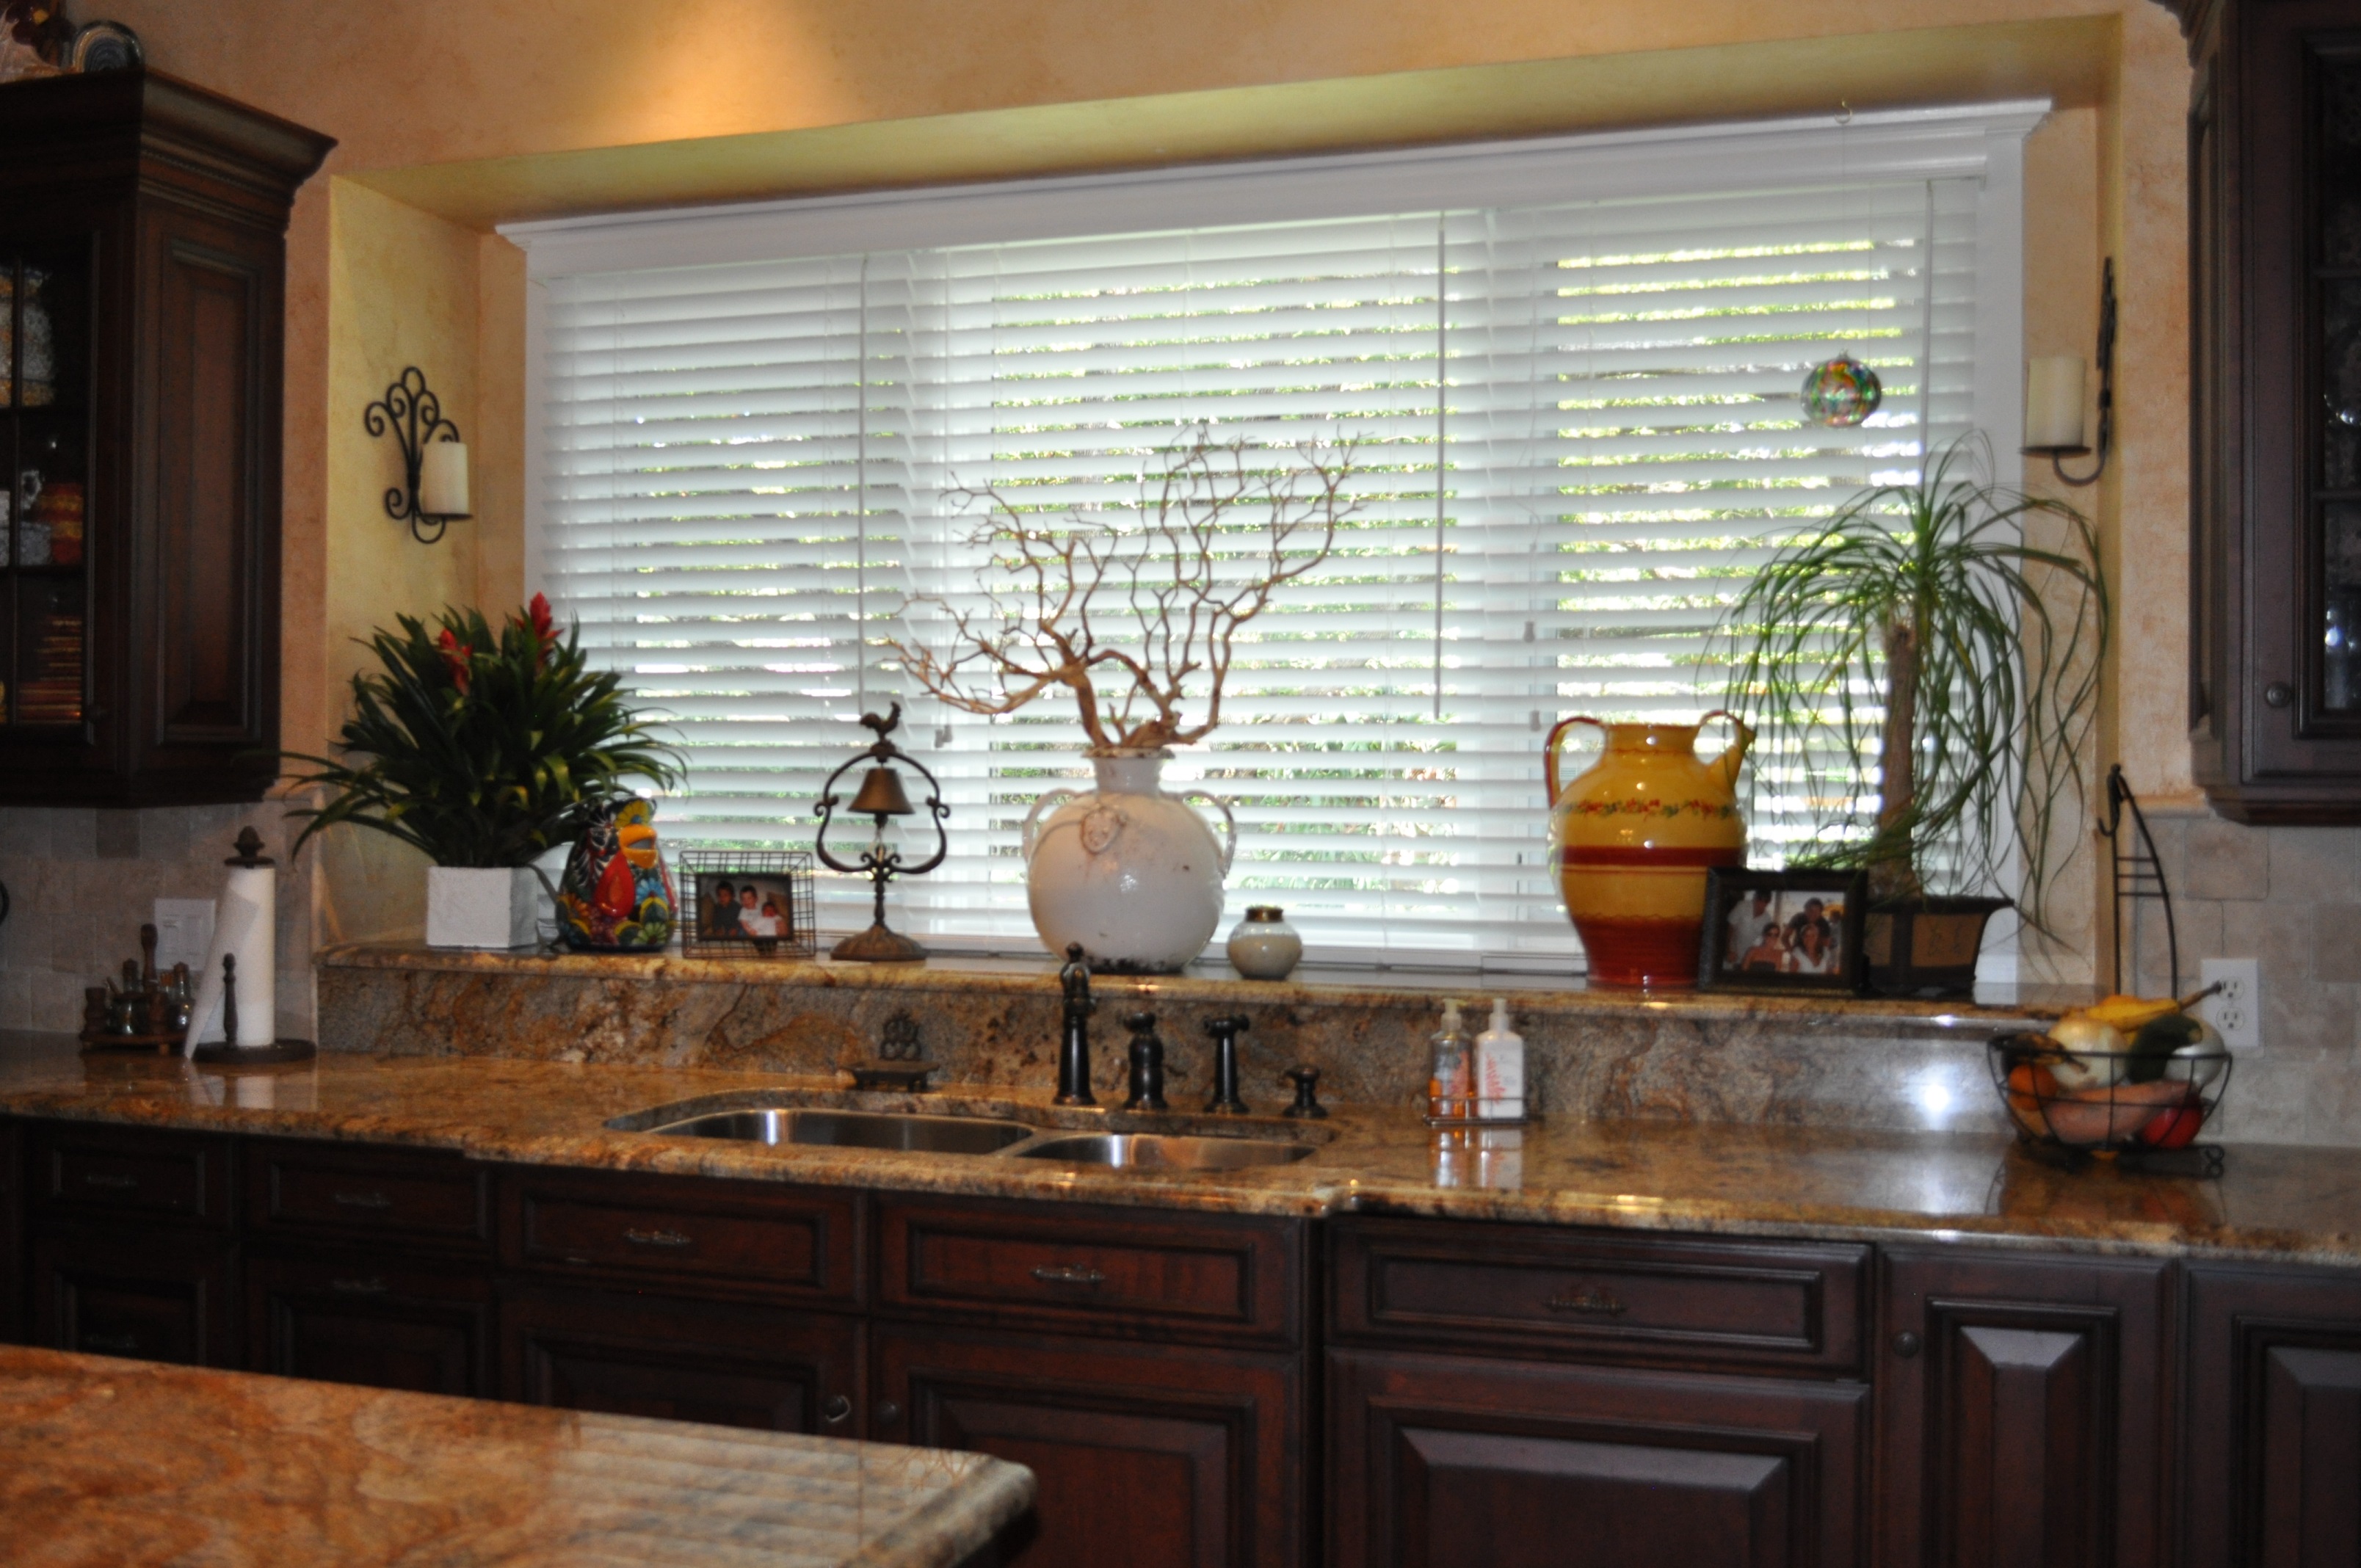 plantation shutters Tampa, window blinds, roller shades